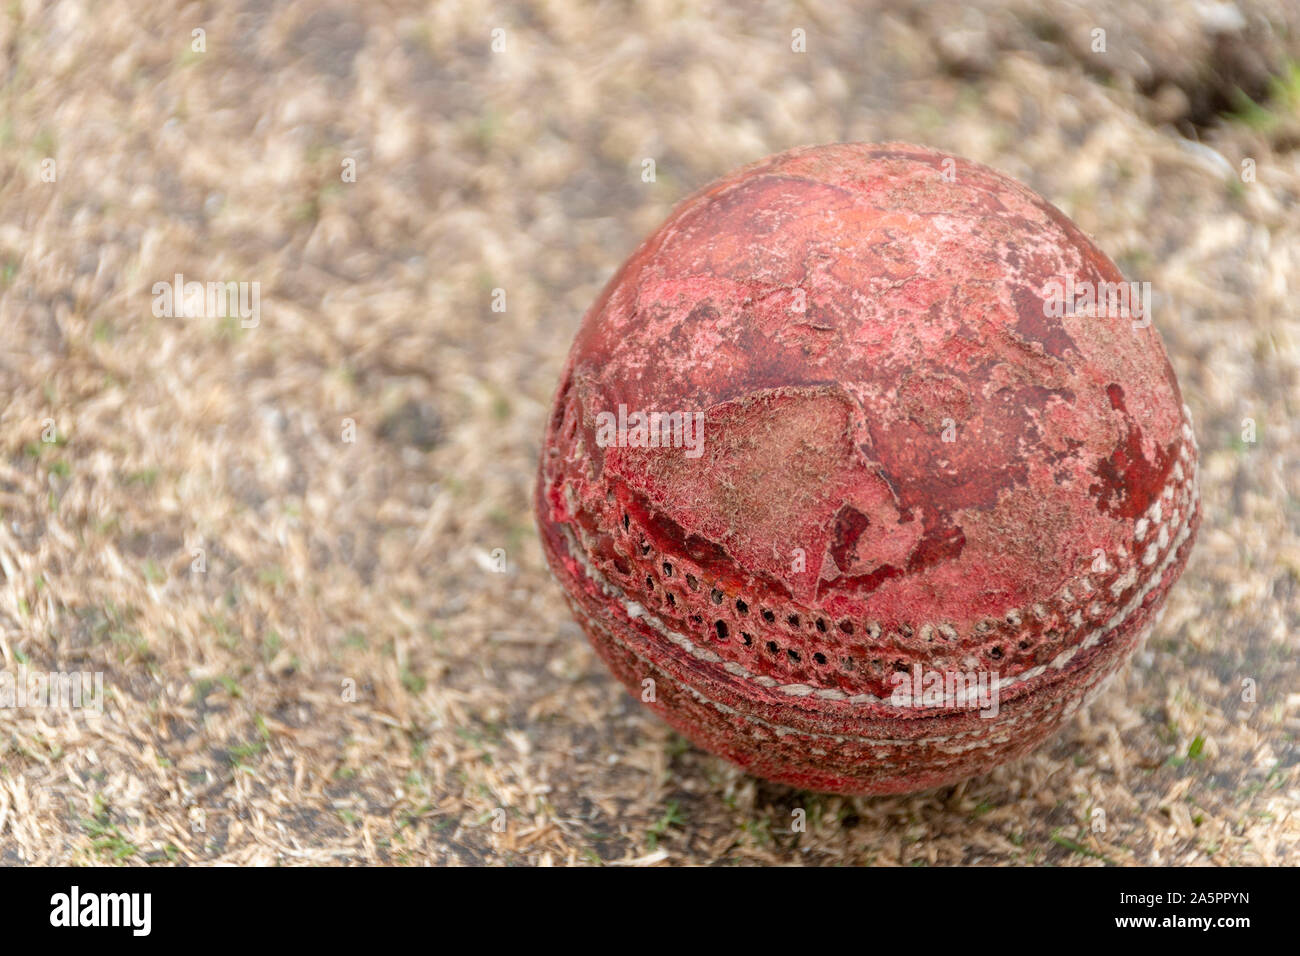 A close up view of a old well used red cricket ball on a grass pitch Stock Photo